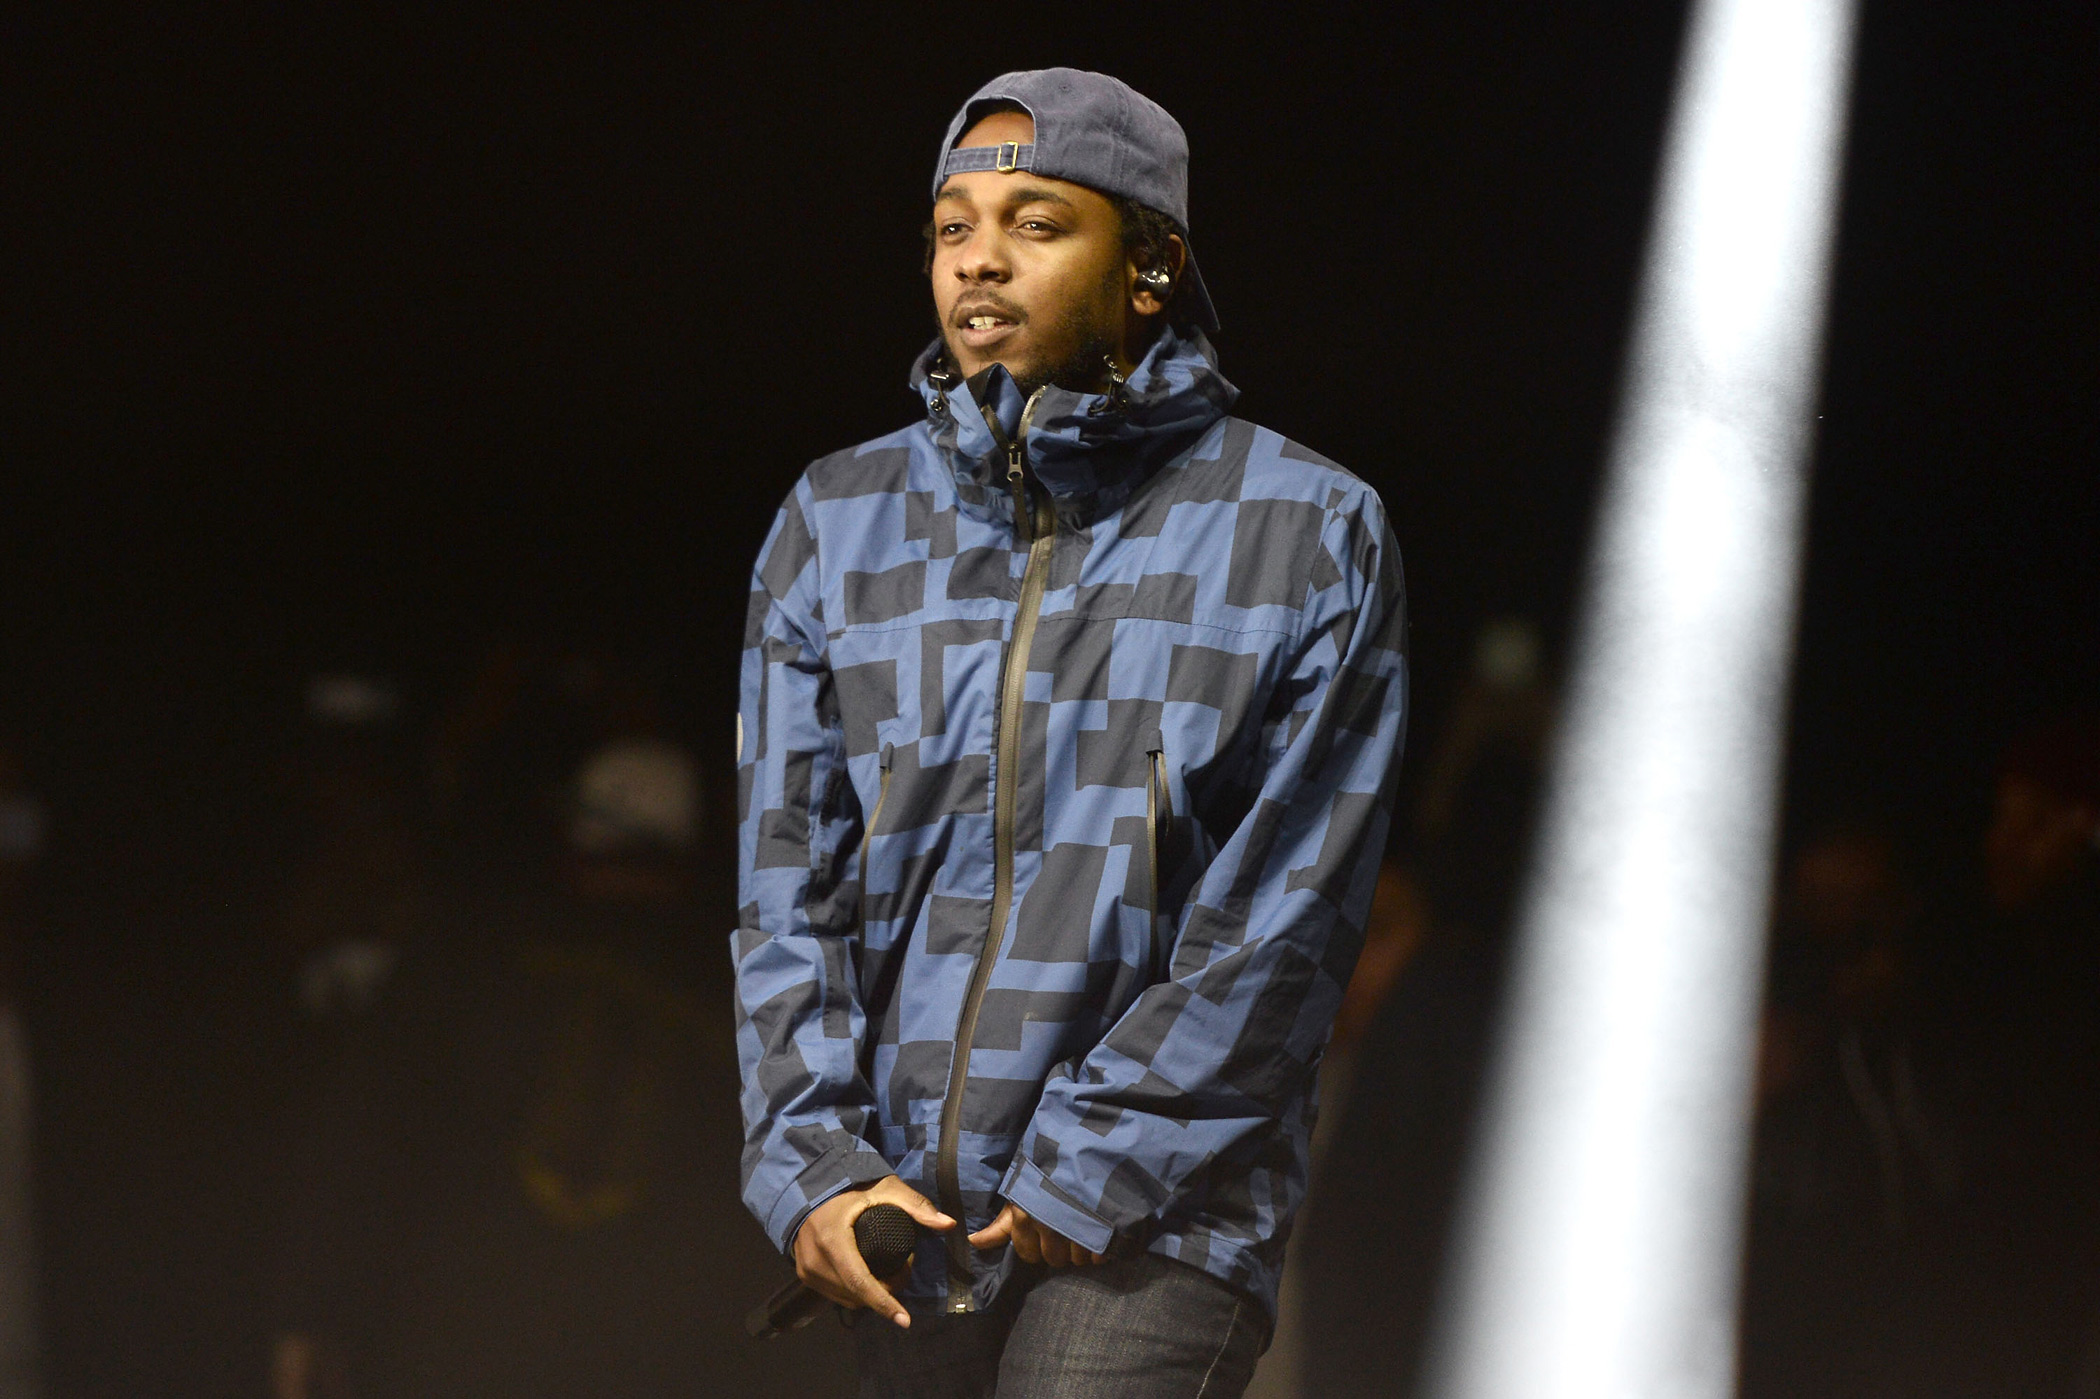 Kendrick Lamar performs onstage at the Rose Bowl in Pasadena, Calif., on Feb. 21, 2015 (Scott Dudelson—Getty Images)